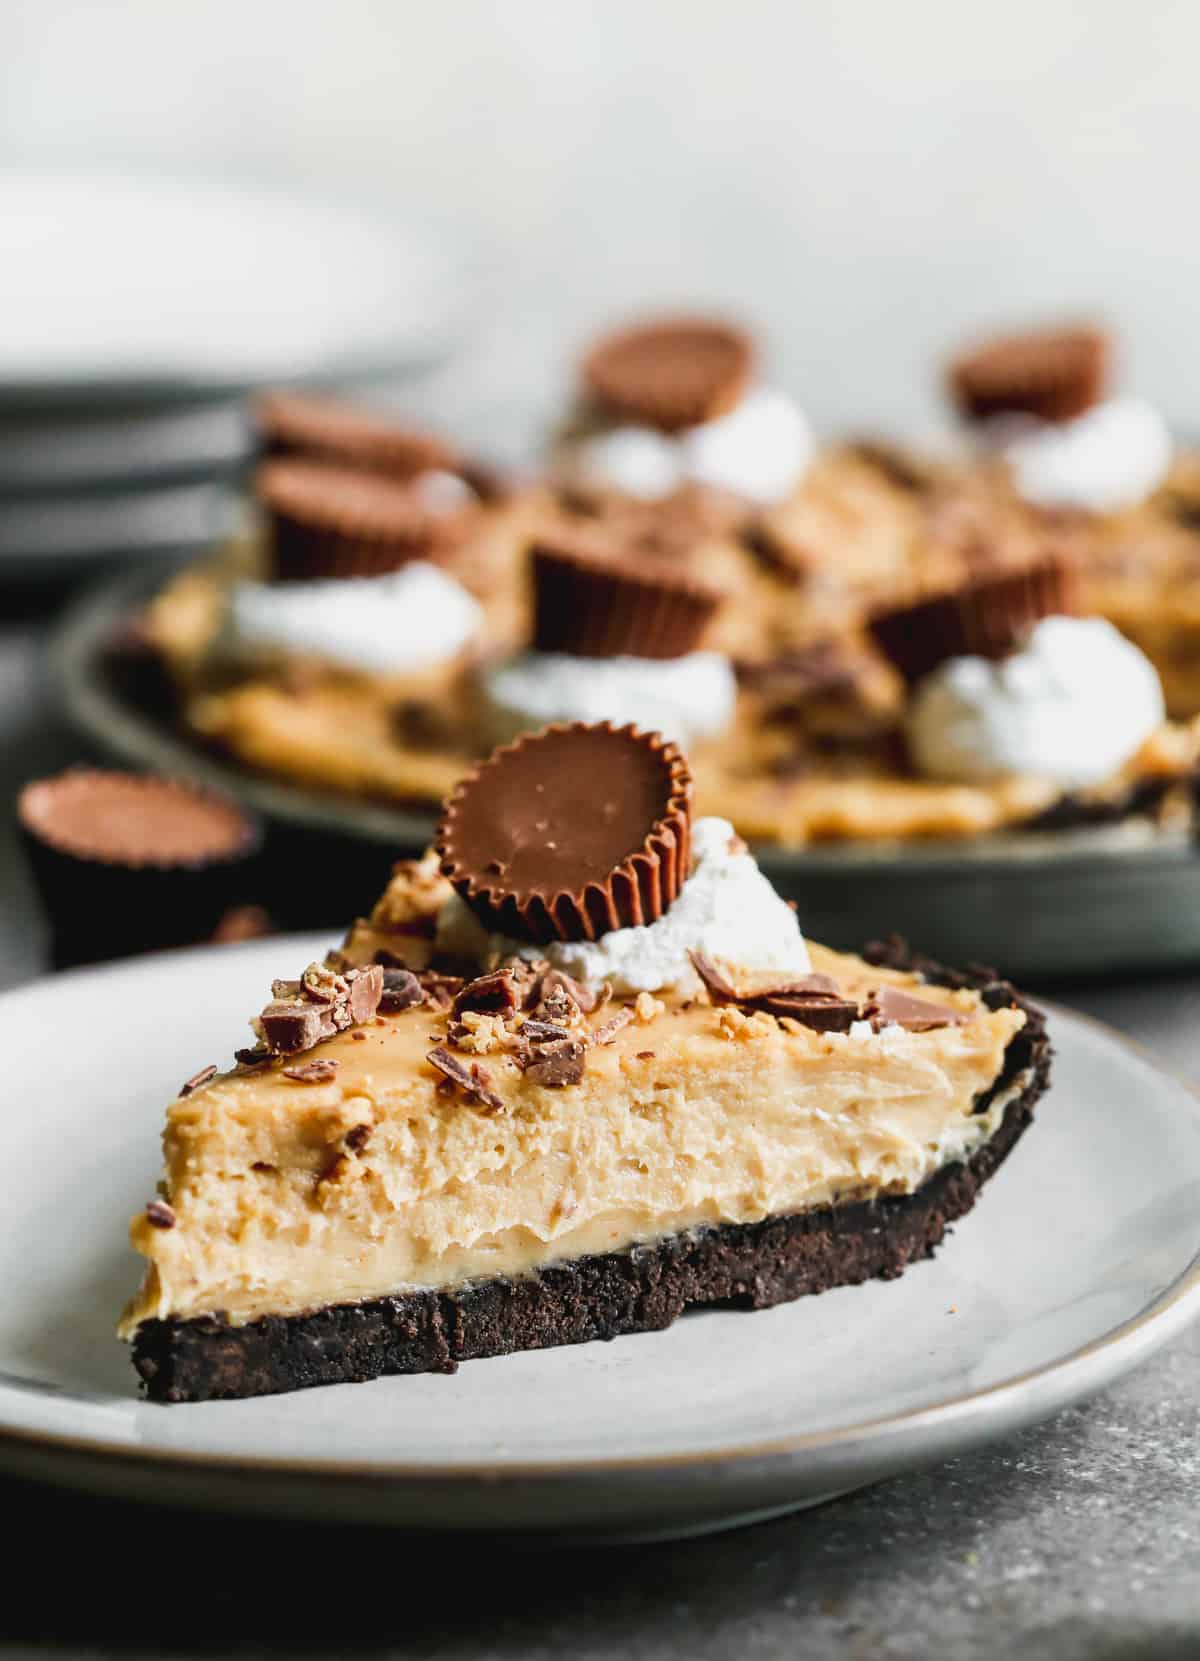 A slice of no bake Peanut Butter Pie on a white plate, ready to enjoy.